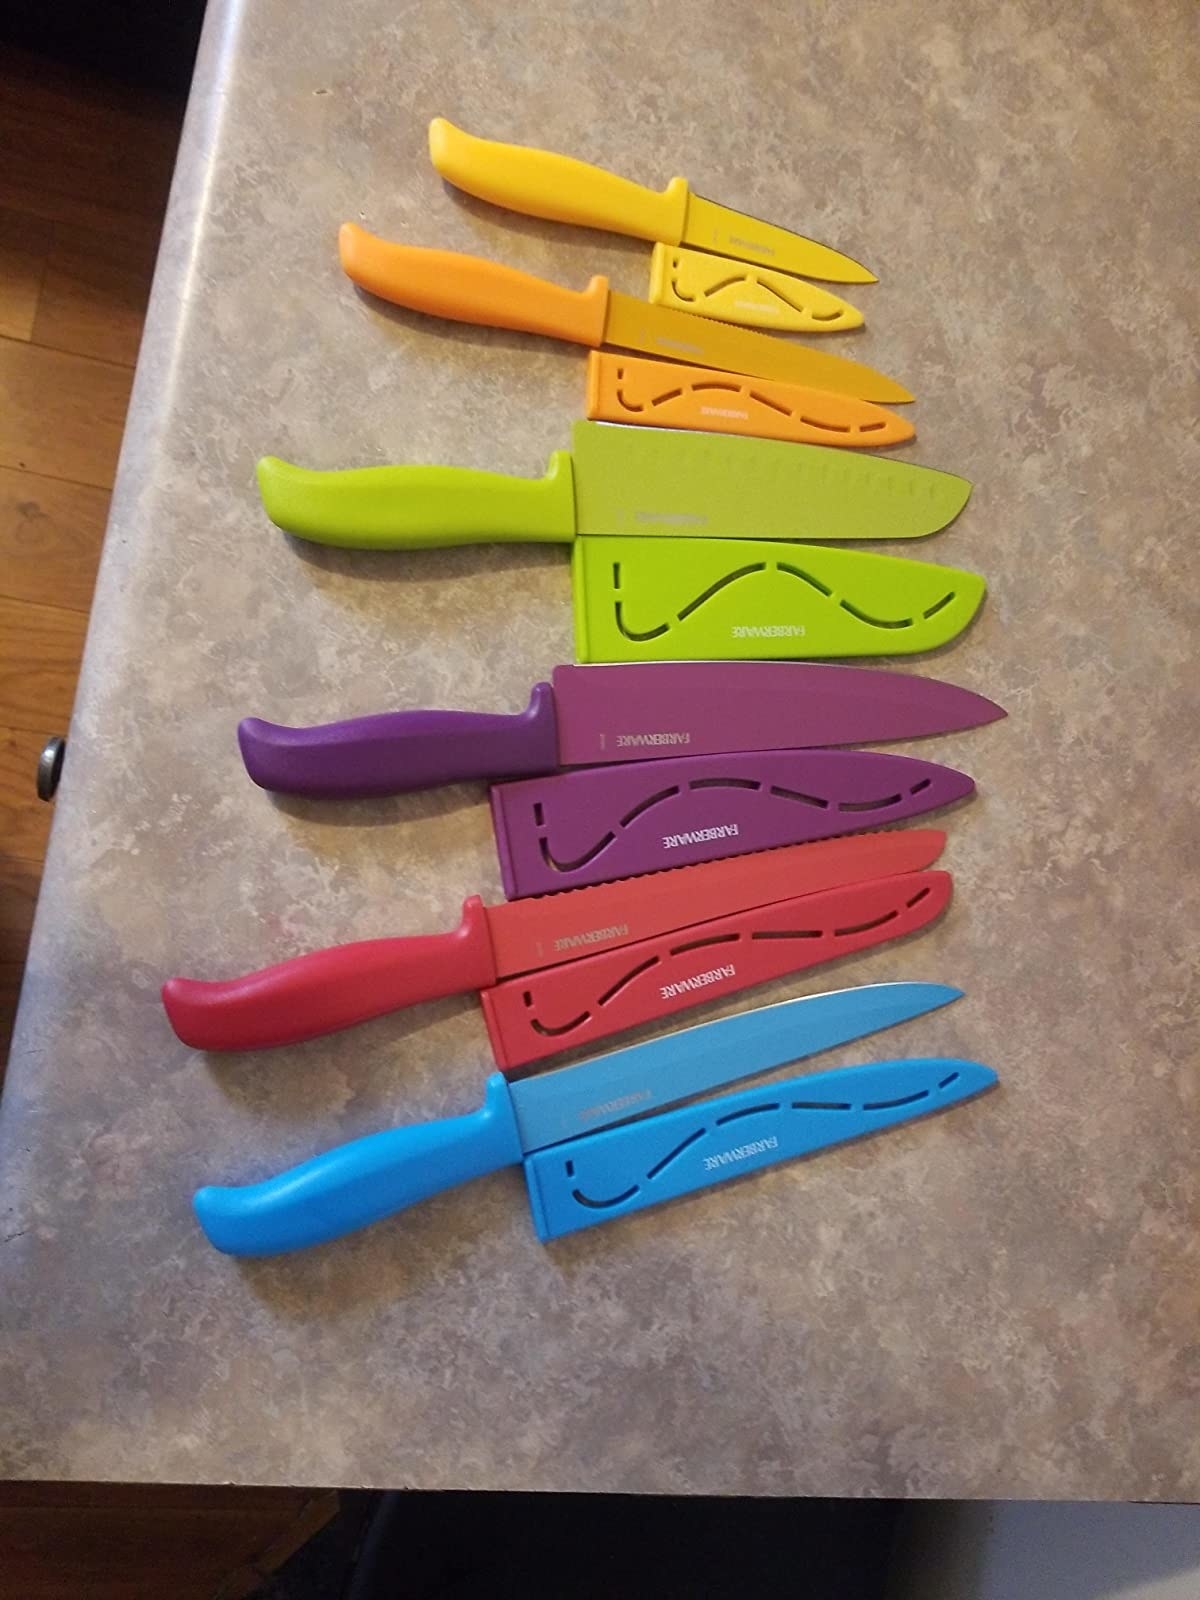 The six knives, each of which are a different bright color, and their corresponding covers